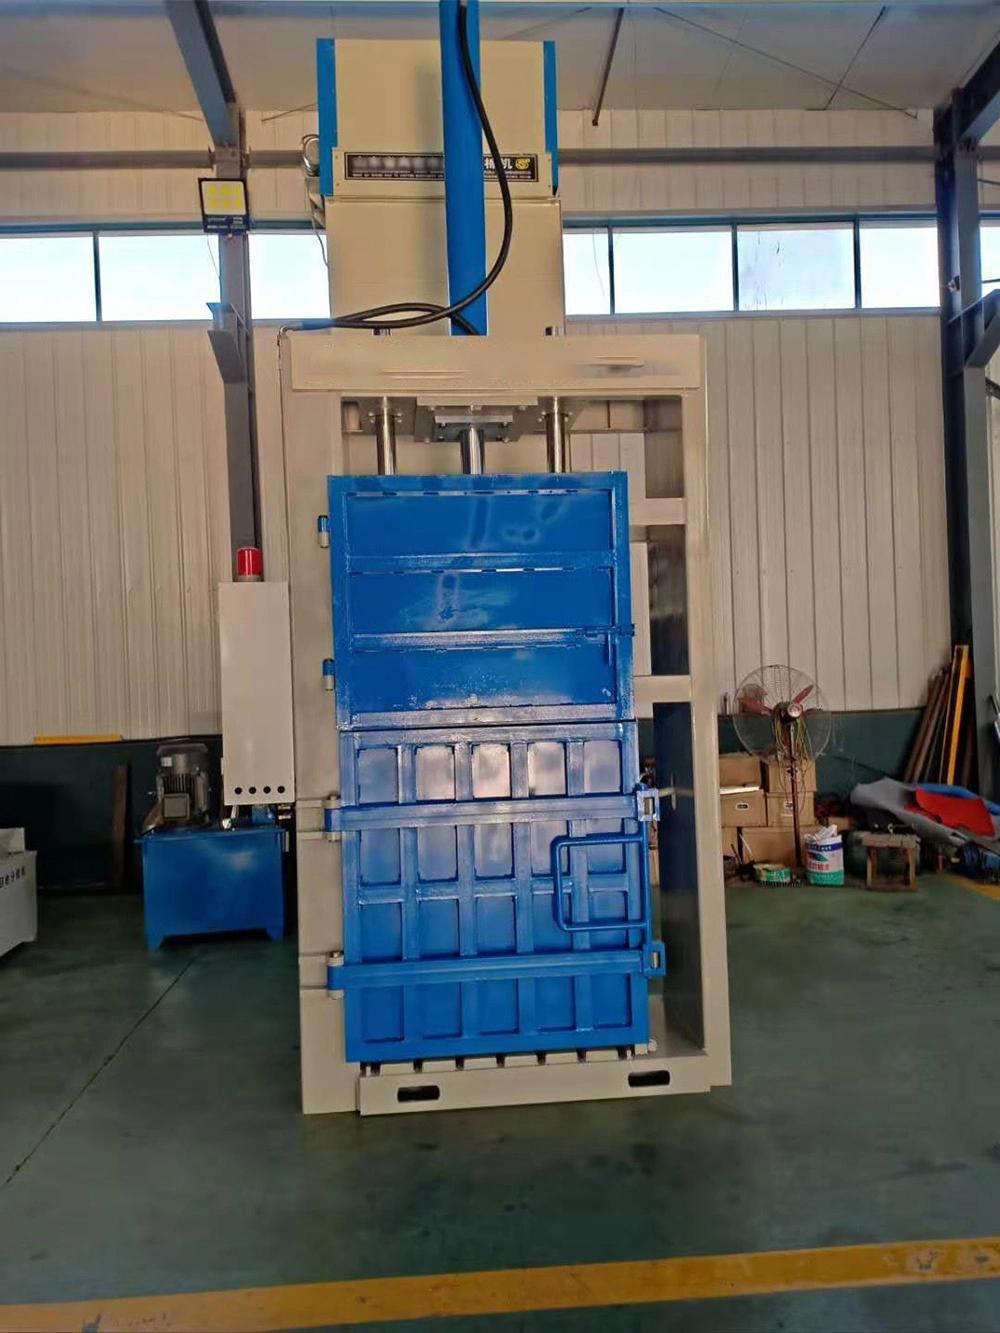 CE Certified Medium-Sized Vertical Baler Waste Paper Hydraulic Press for Packaging Cartons/Corrugated Cartons/Plastic Film/Blister Film/Paper Recycling